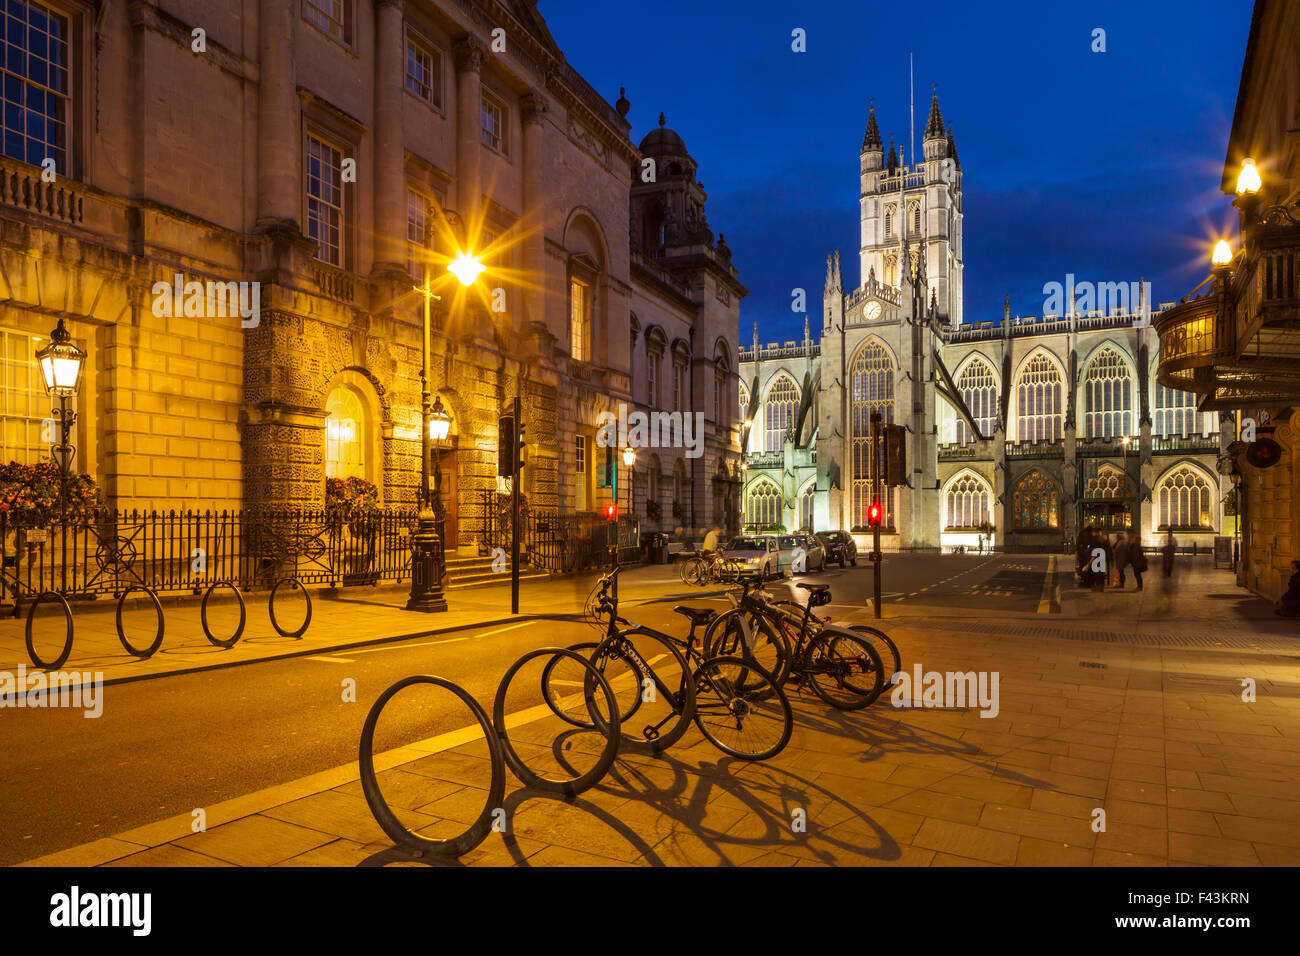 Evening at Bath Abbey and Guildhall in Bath, England. Stock Photo